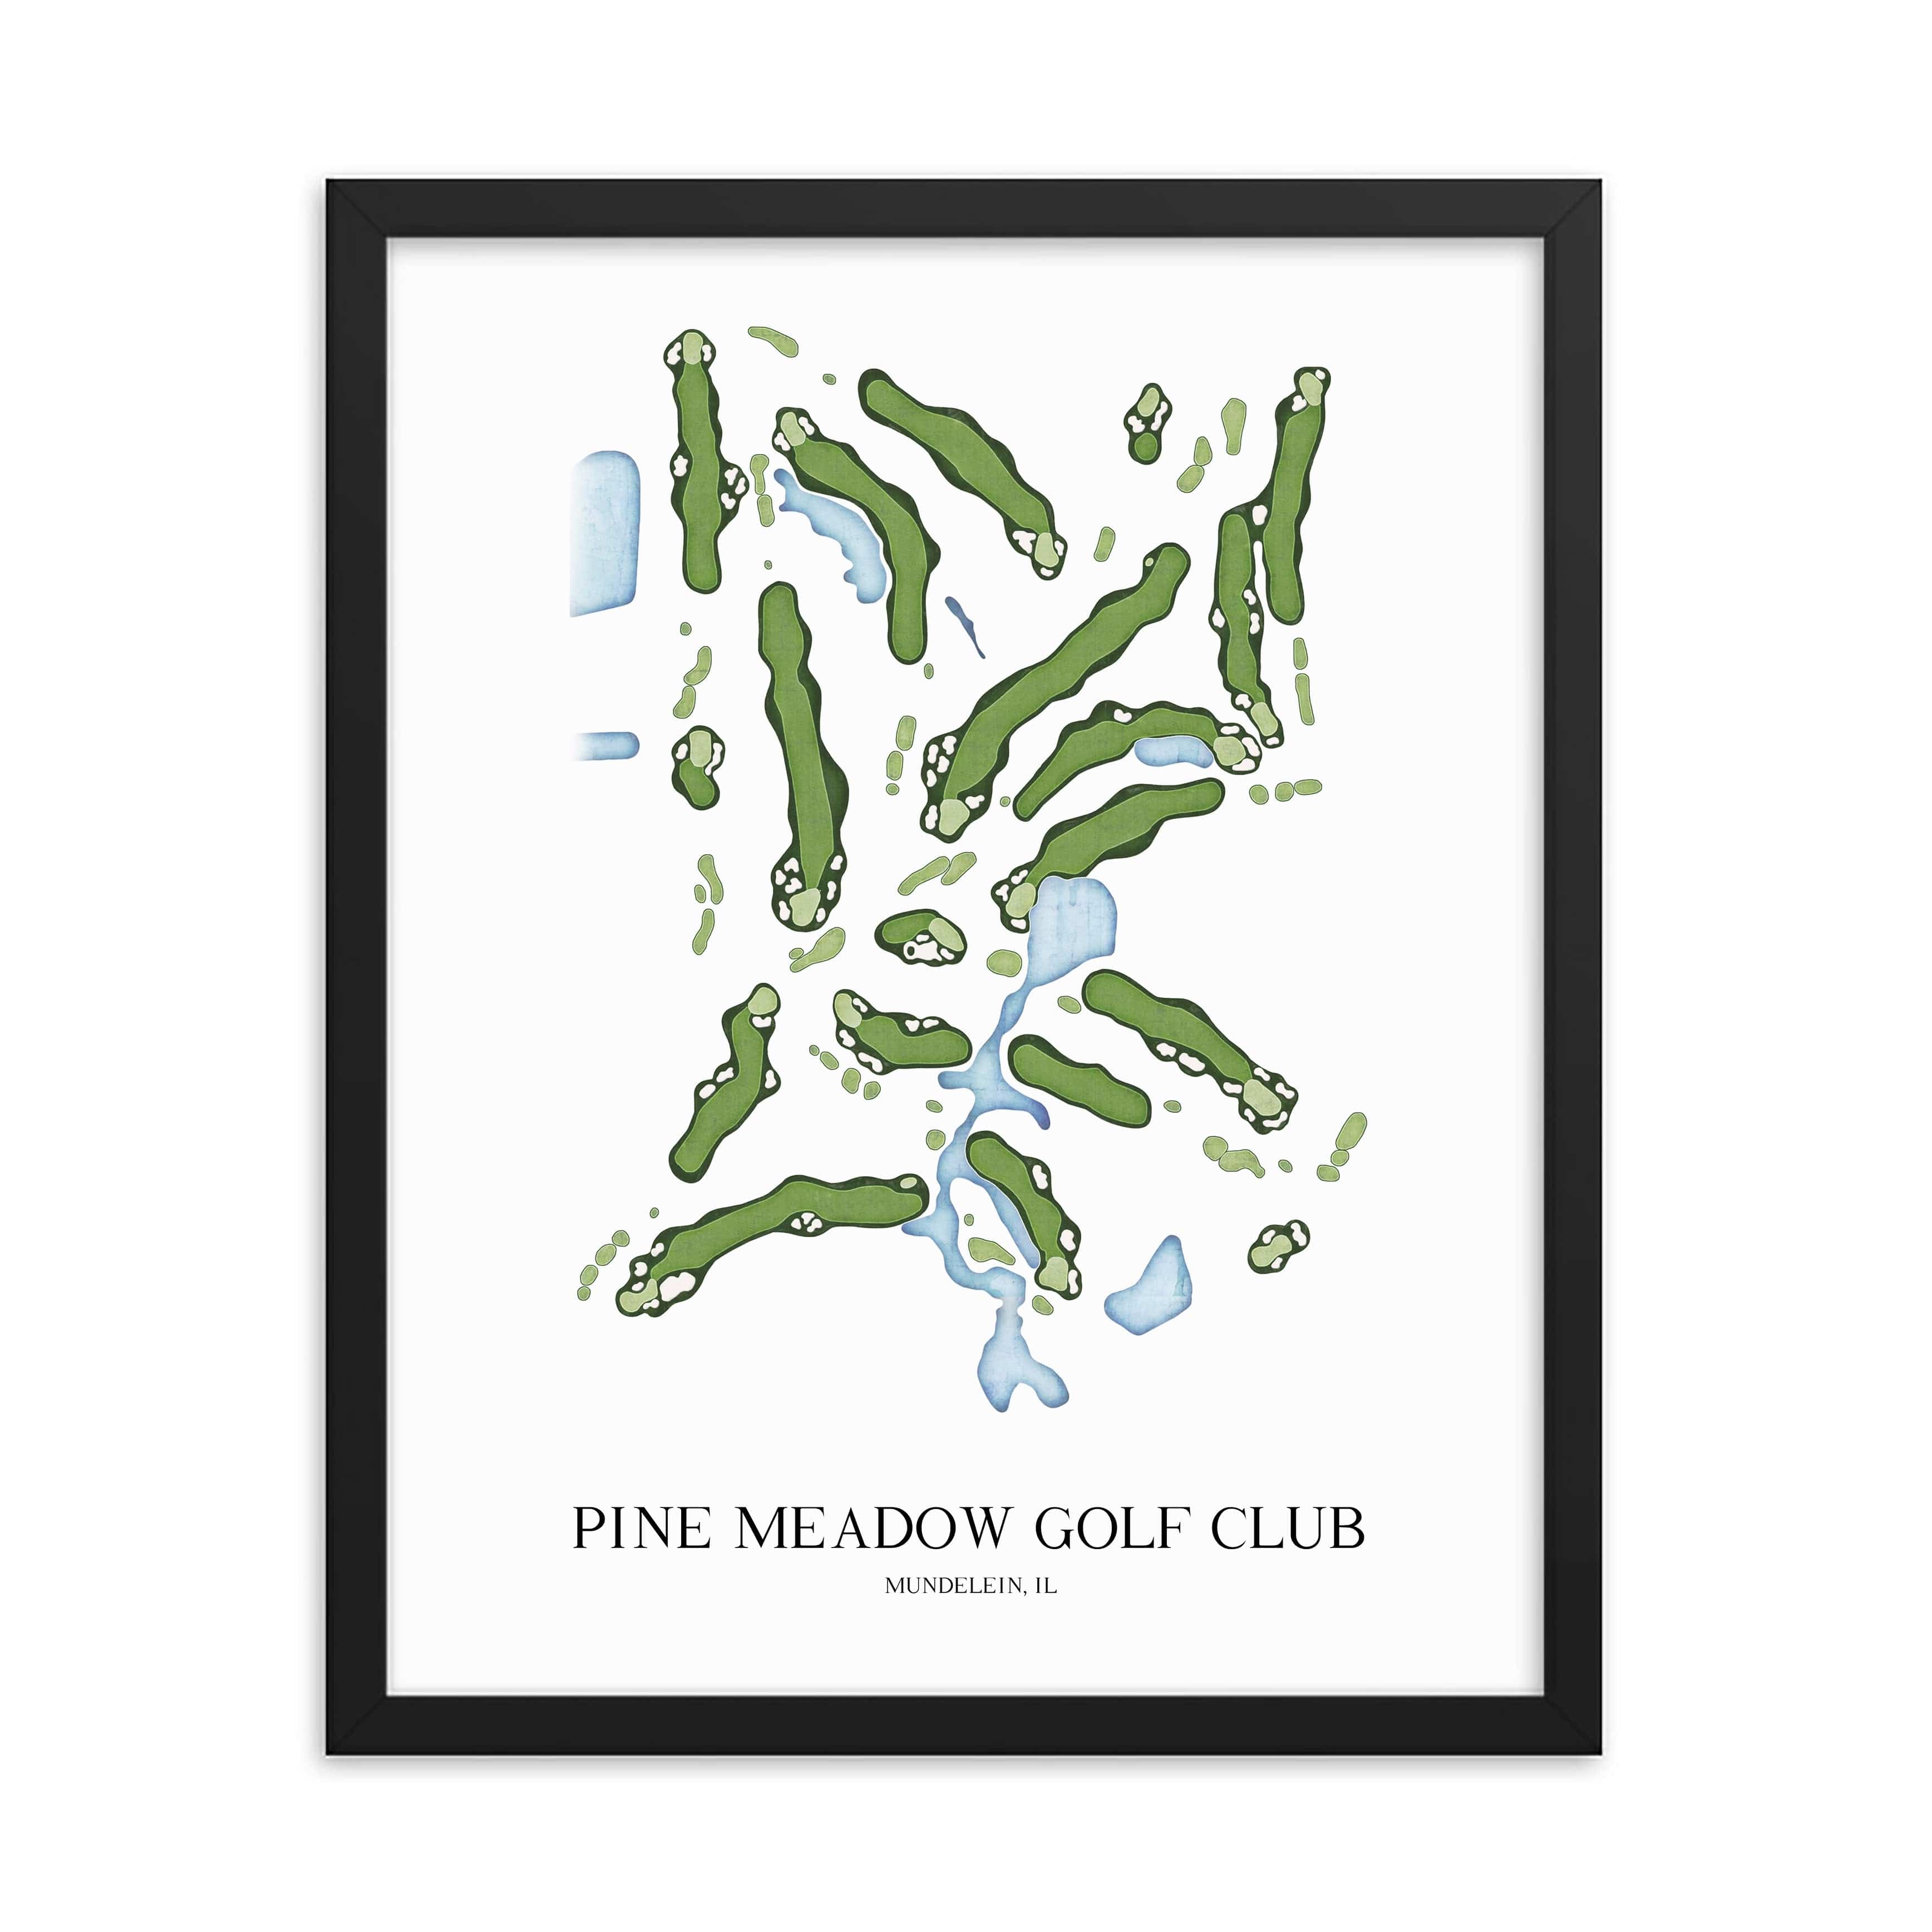 The 19th Hole Golf Shop - Golf Course Prints -  Pine Meadow Golf Club Golf Course Map